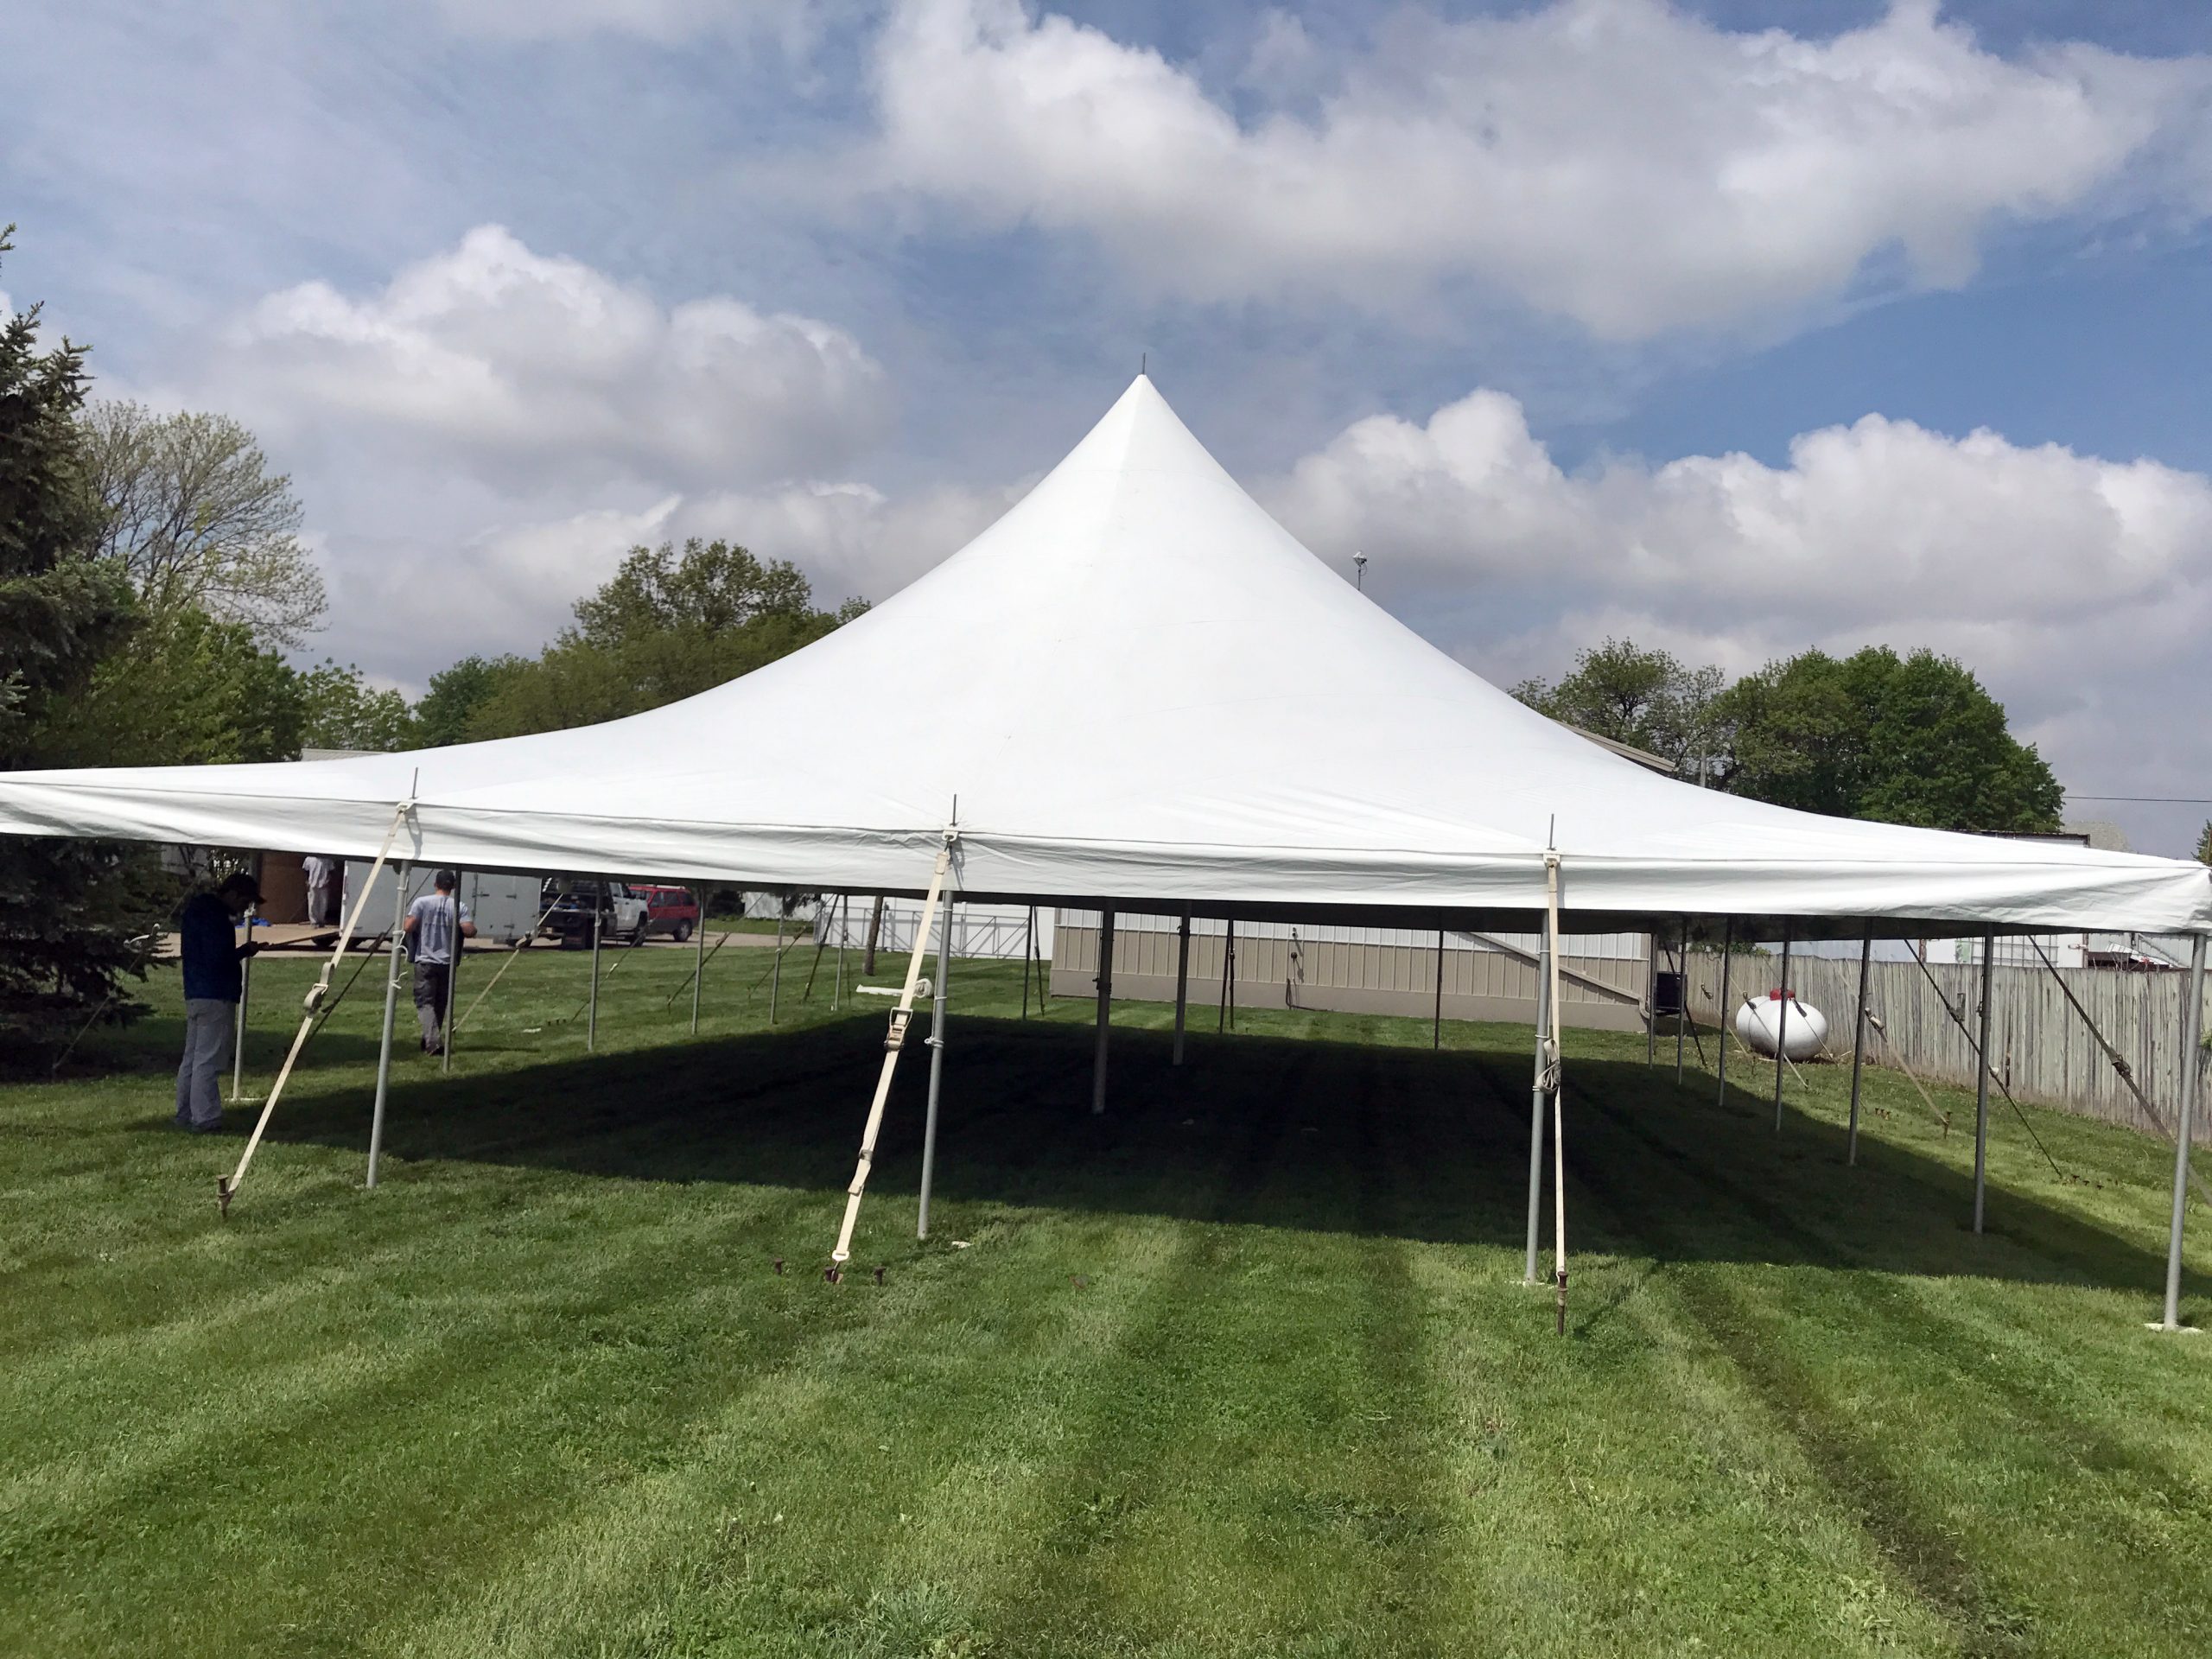 End of 40' x 60' rope and pole Birthday Party tent in Washington, Iowa